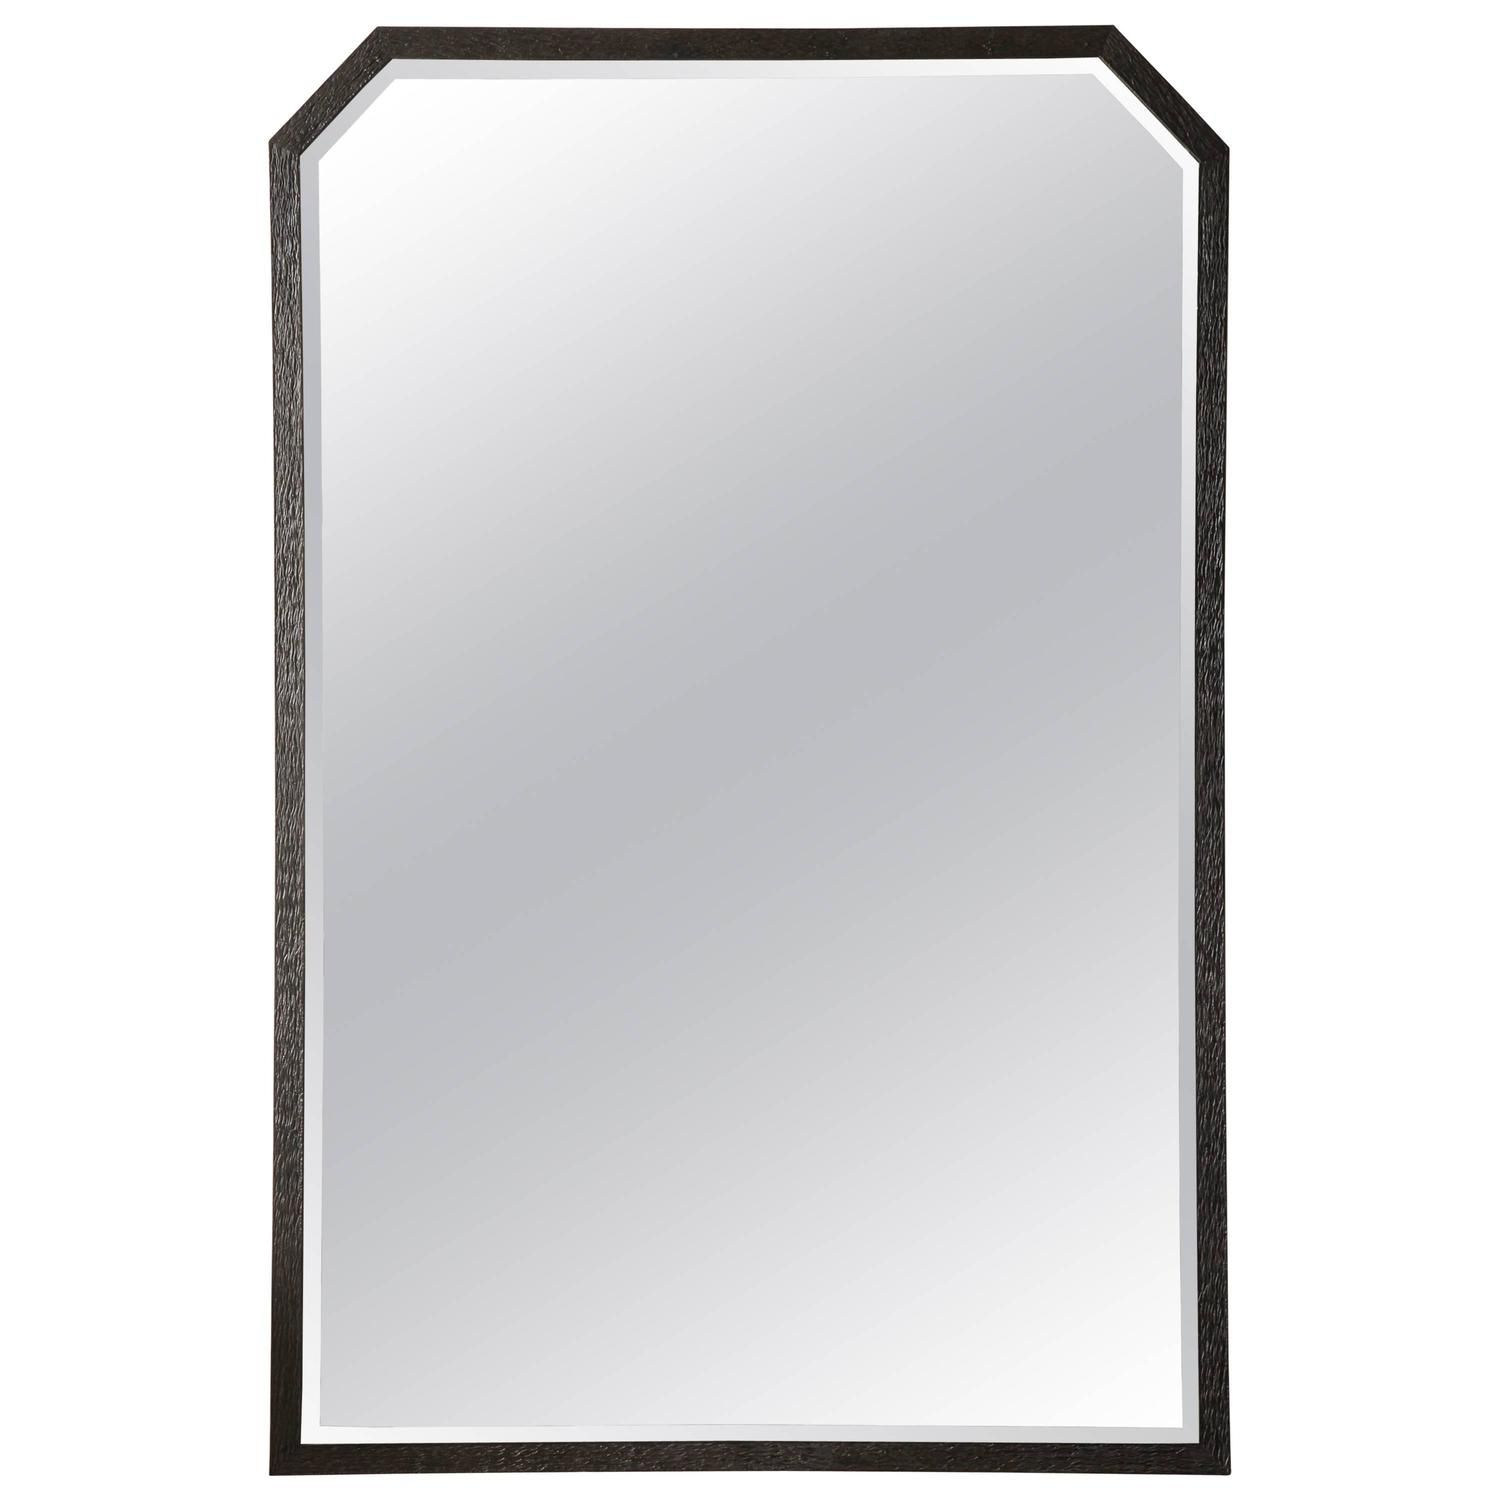 Mid Century Iron Rectangular Mirror For Sale At 1Stdibs With Regard To Natural Iron Rectangular Wall Mirrors (View 10 of 15)